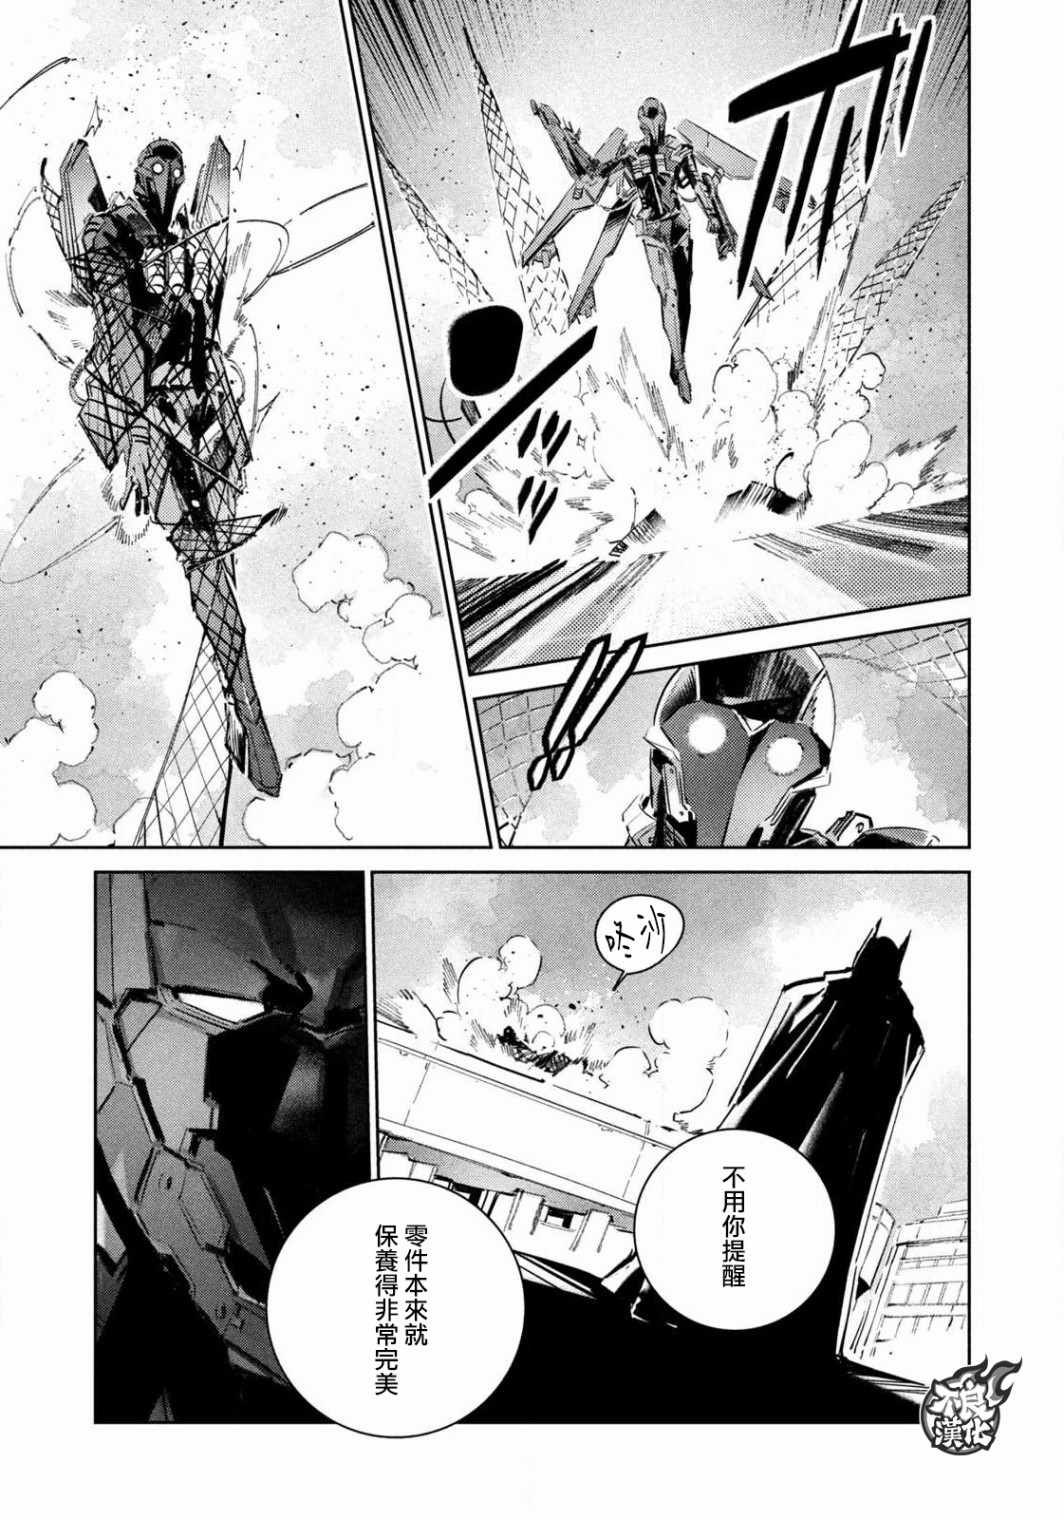 《BATMAN JUSTICE BUSTER》漫画 JUSTICE BUSTER 001集